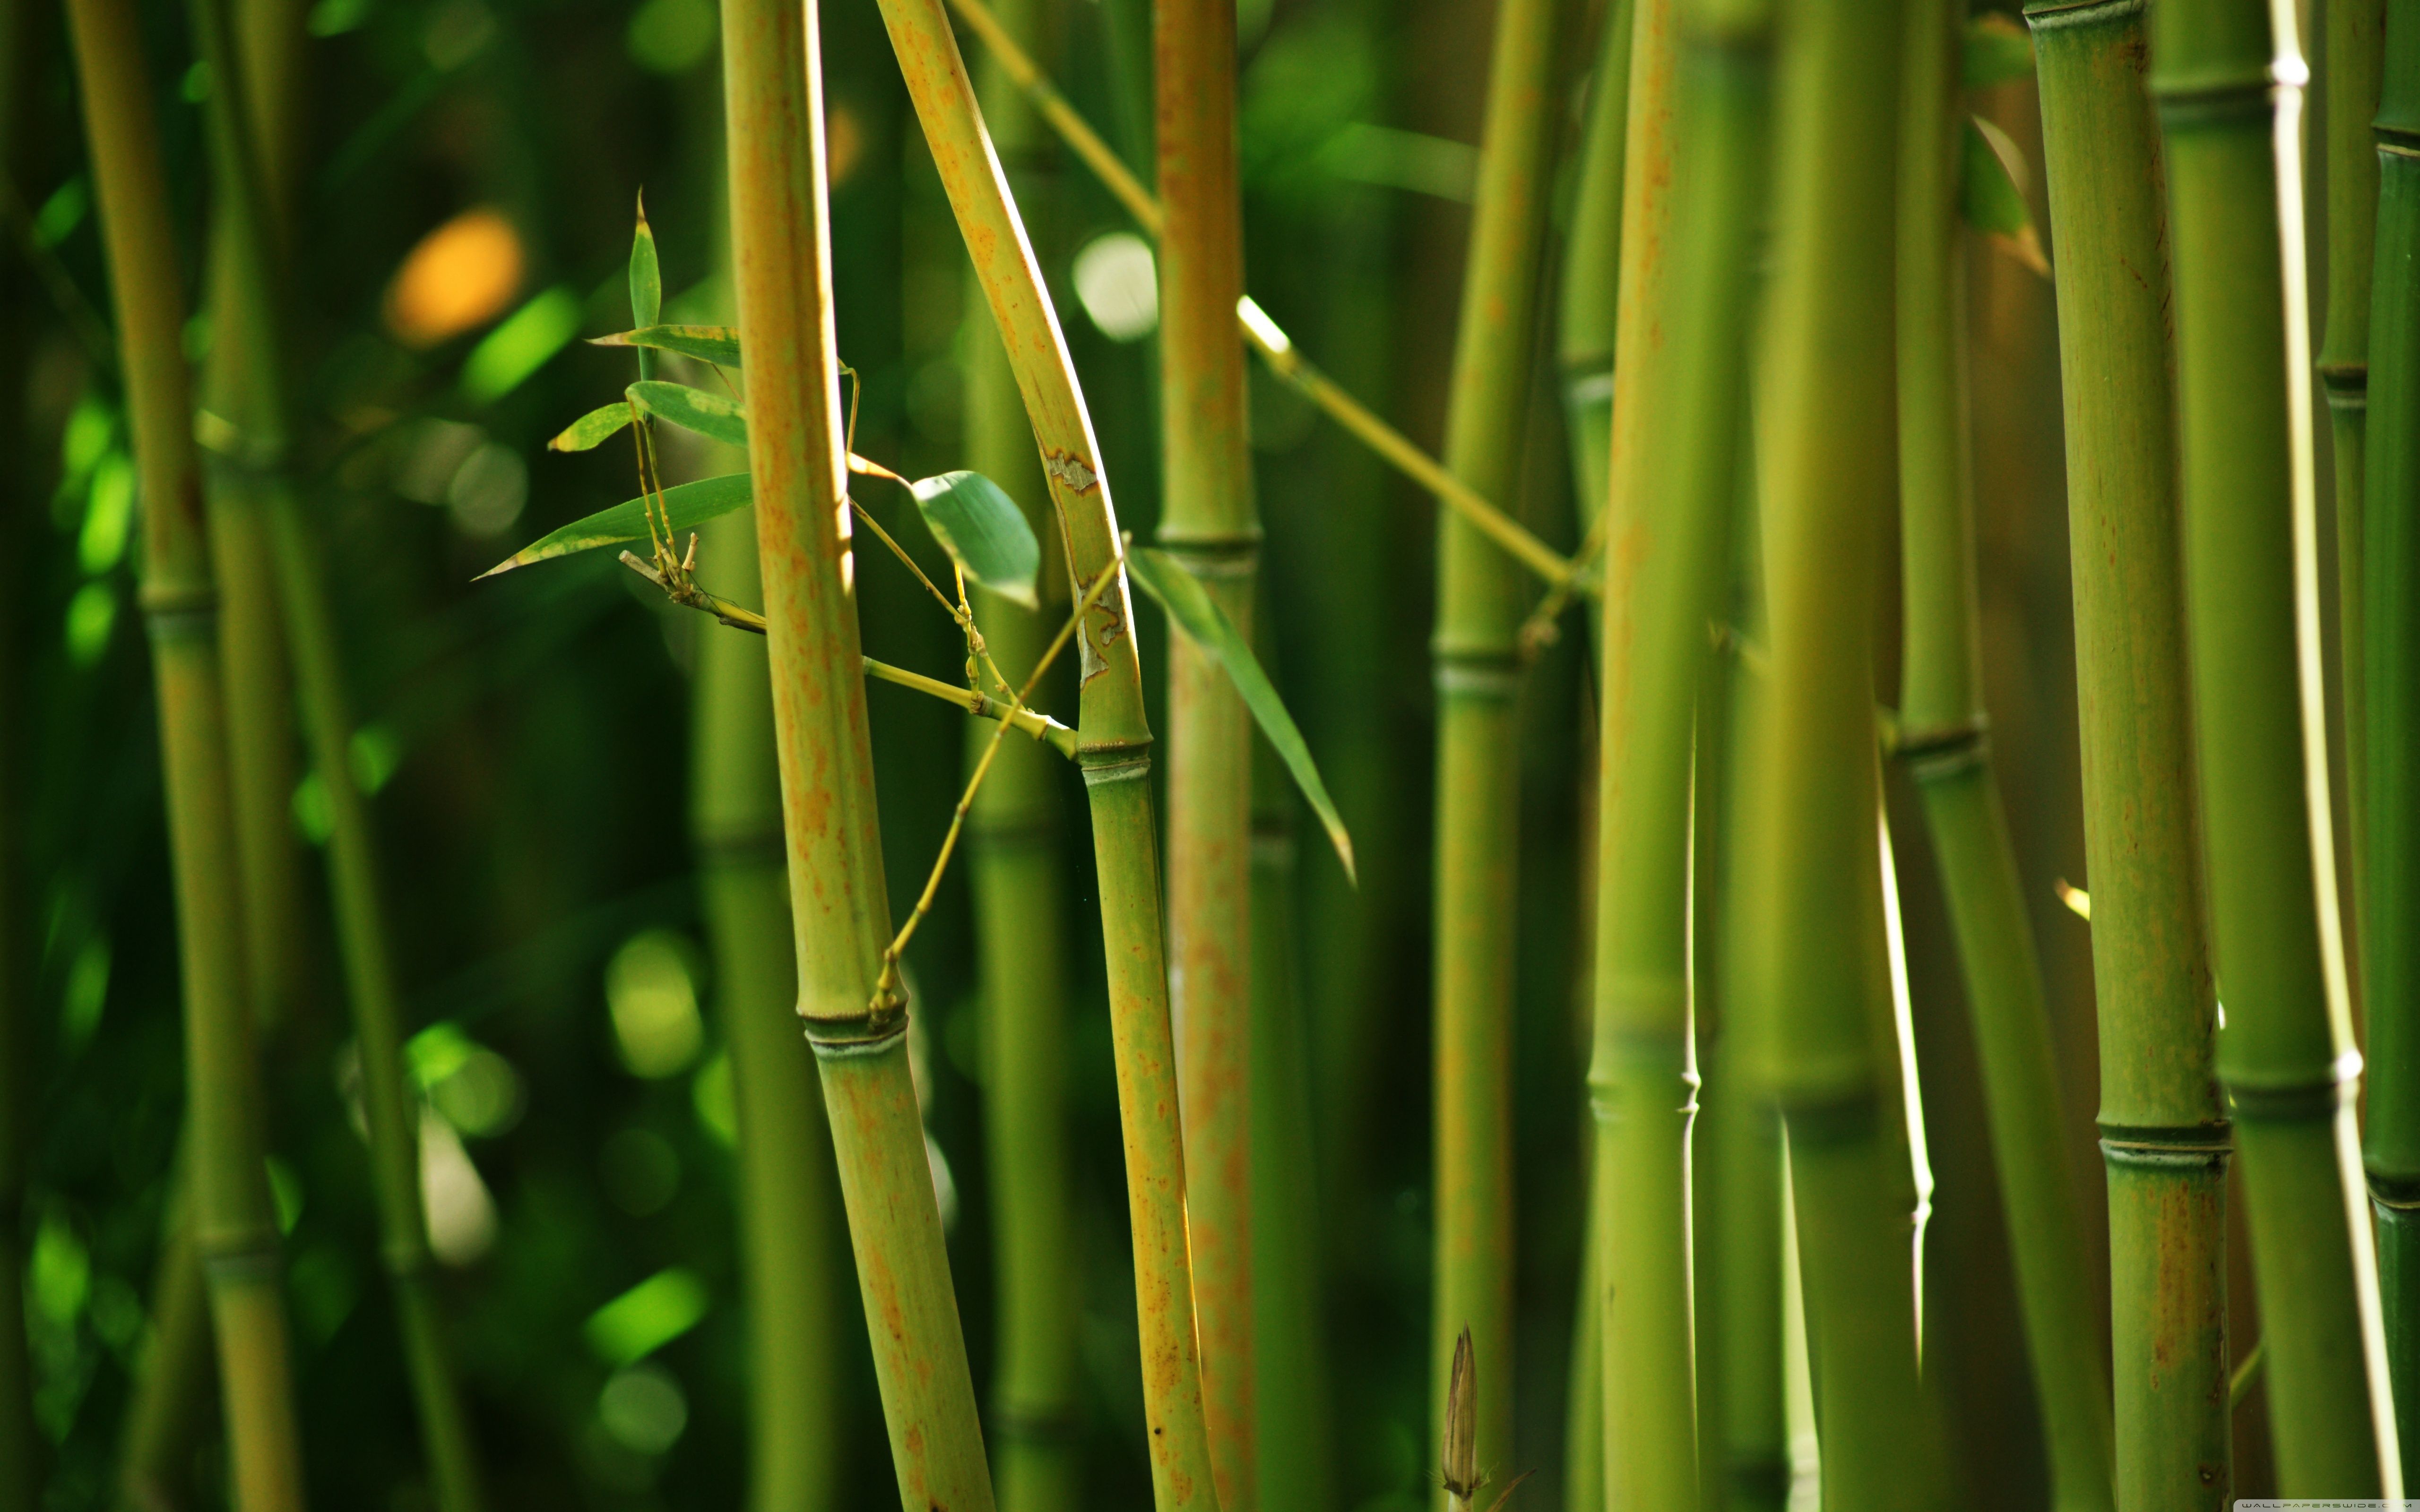 Free HD Bamboo Wallpapers | HD Wallpapers | Pinterest | Bamboo ...